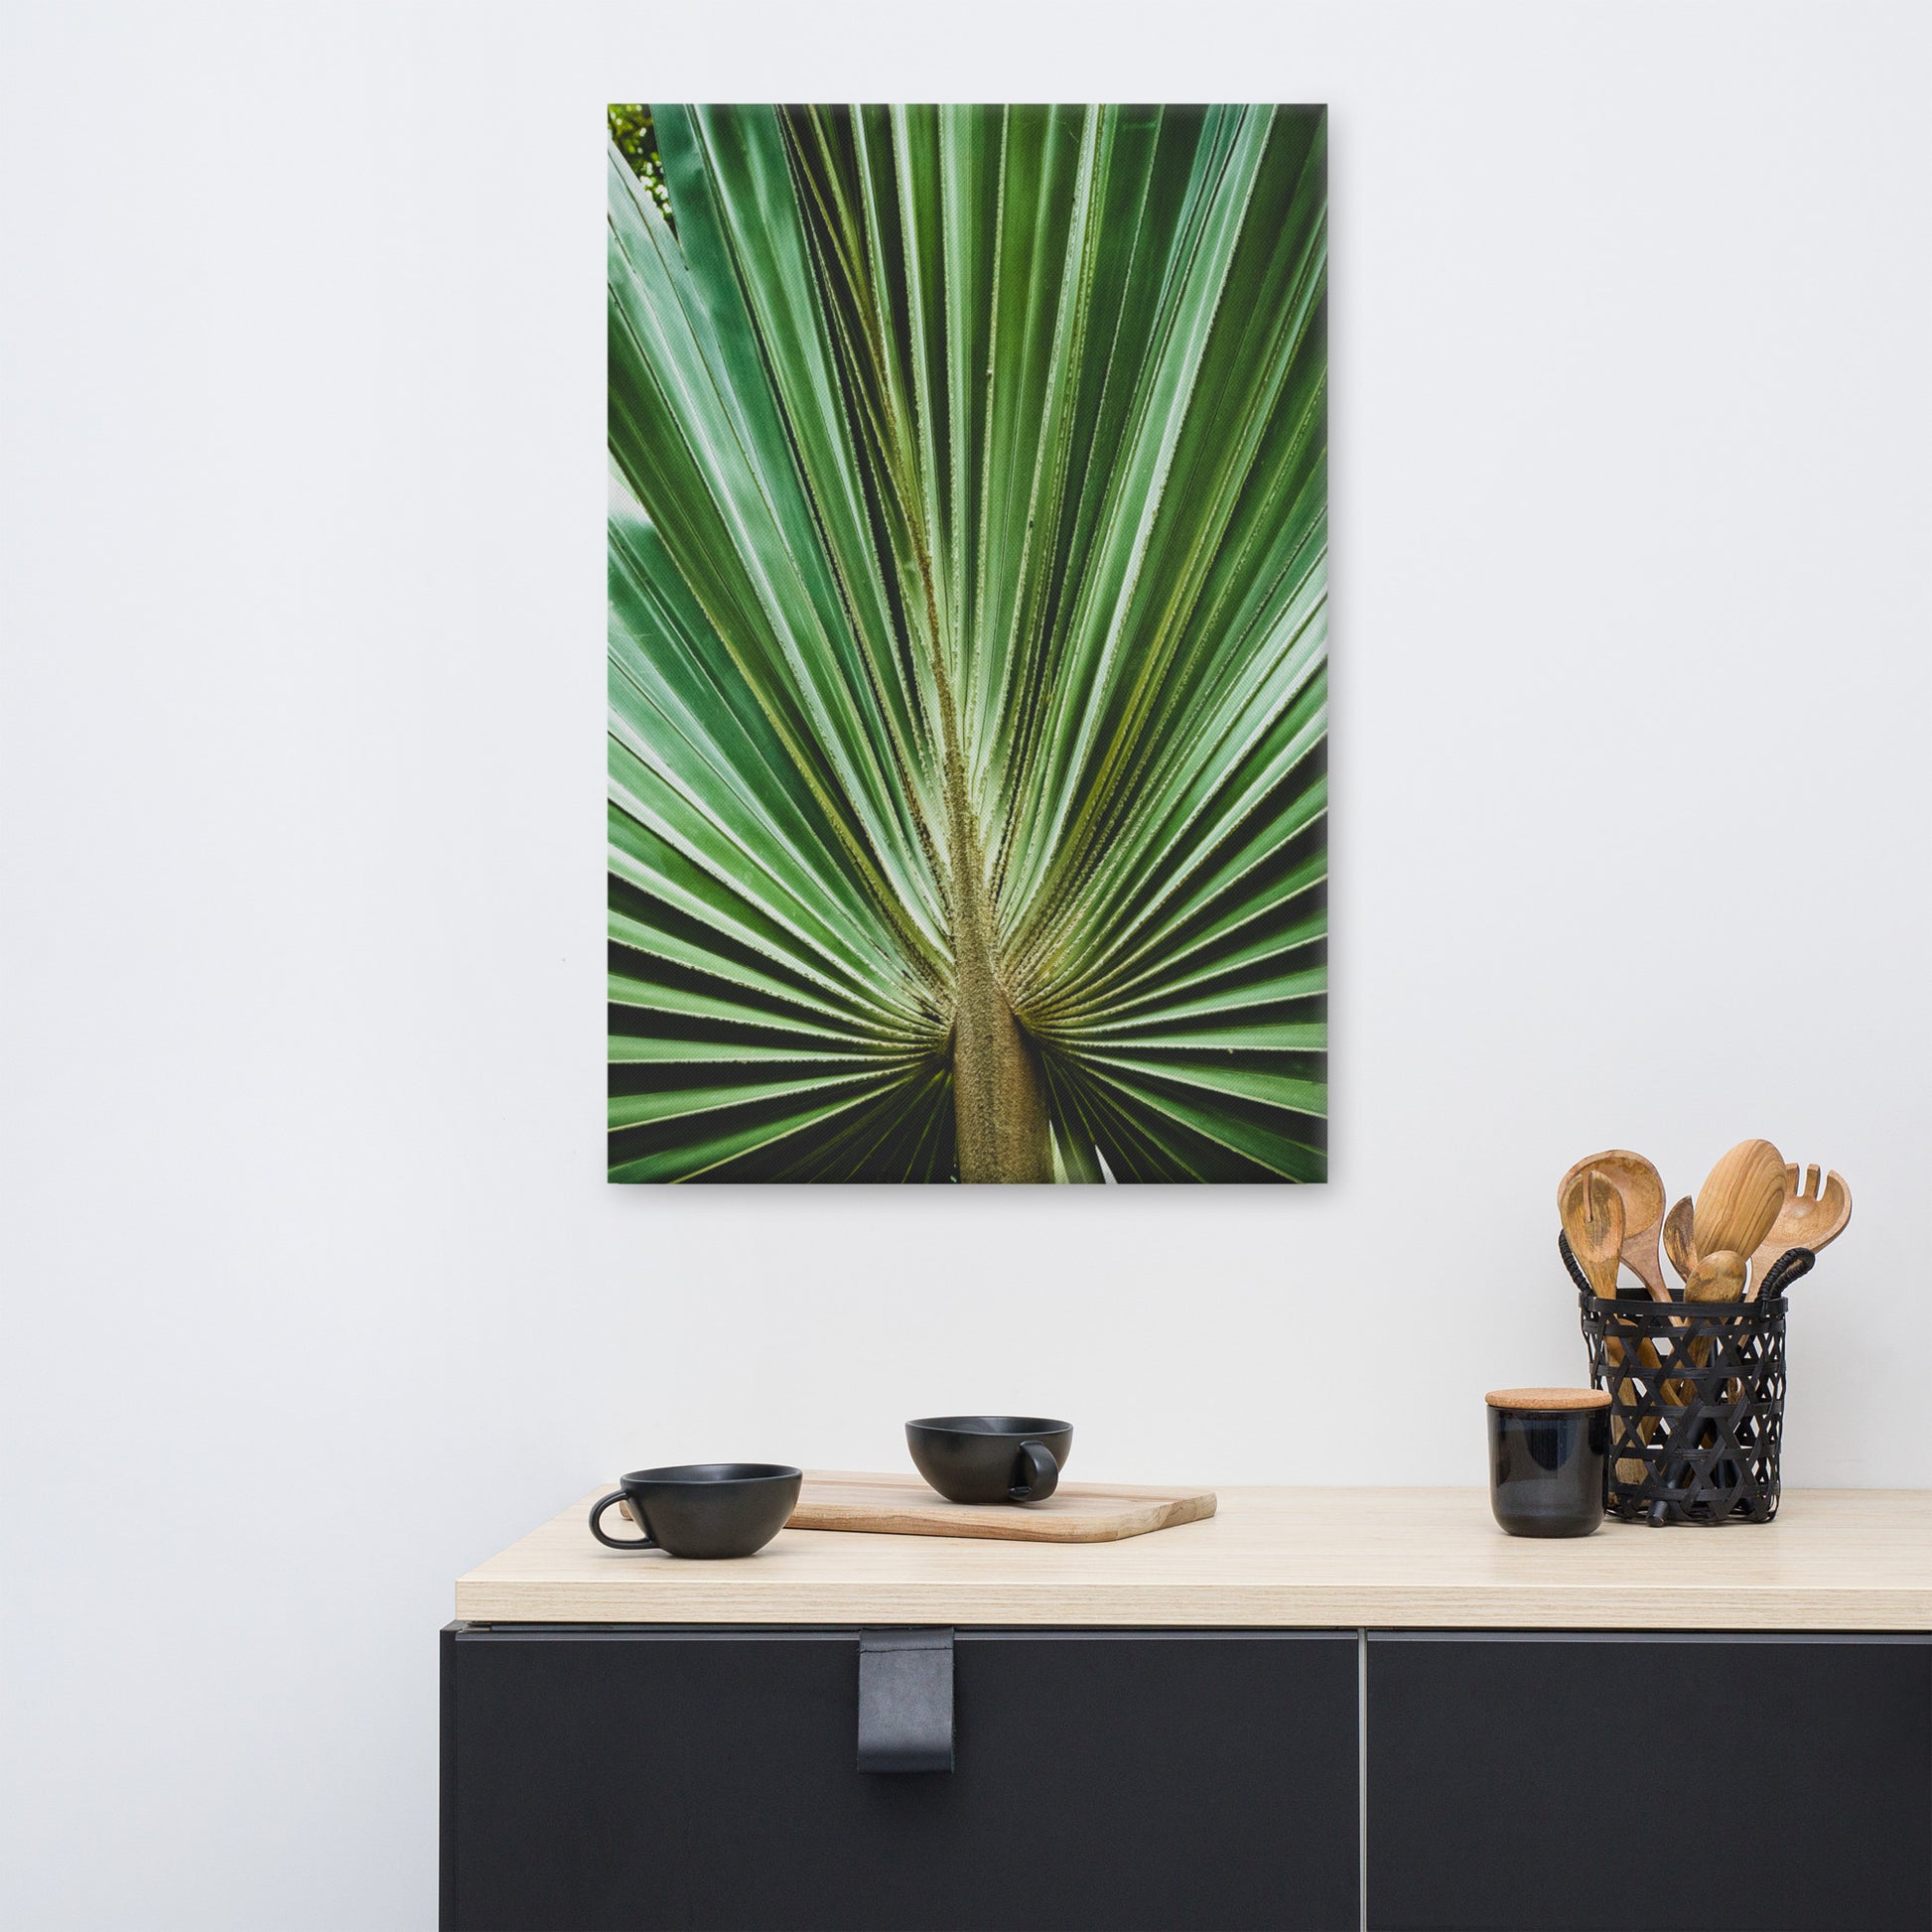 Contemporary Wall Decor For Dining Room: Aged and Colorized Wide Palm Leaves 2 - Botanical / Plants Nature Photograph Canvas Wall Art Print - Artwork